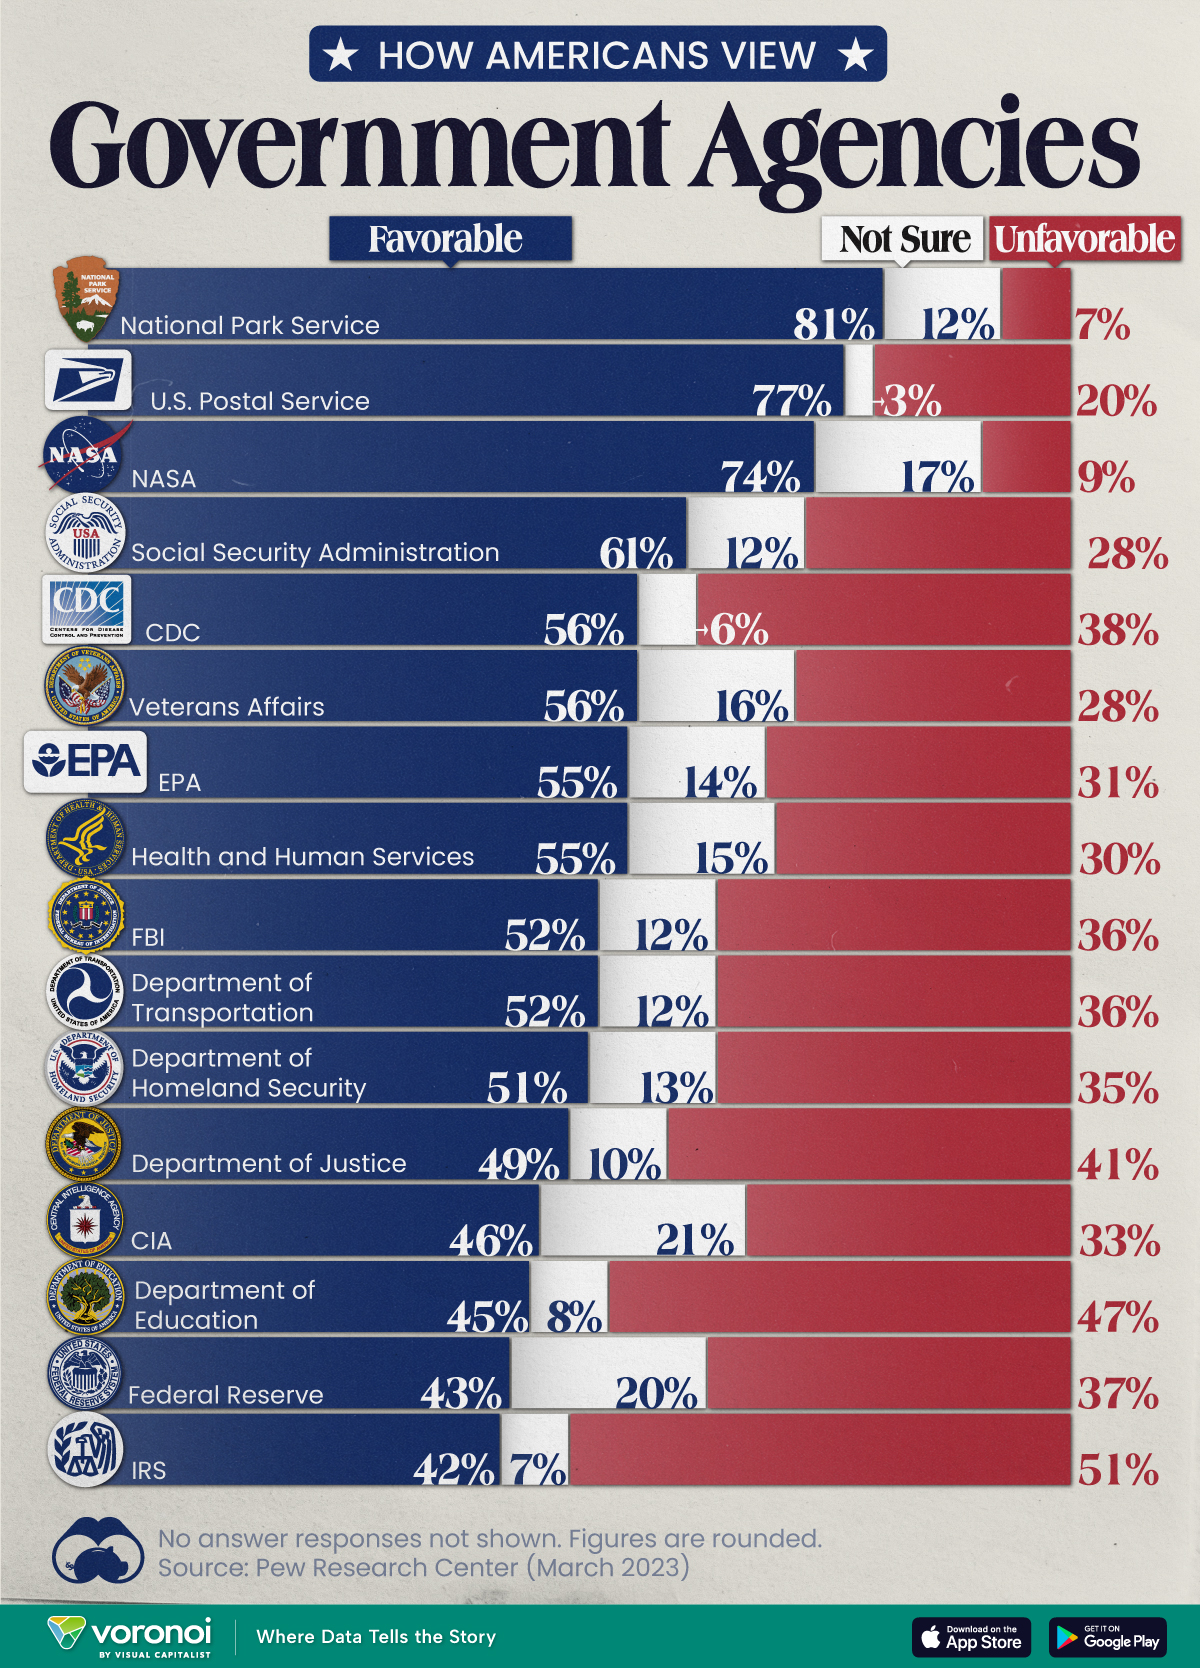 A chart with the favorability ratings of 16 federal government agencies based on a March 2023 survey, conducted by Pew Research Center.